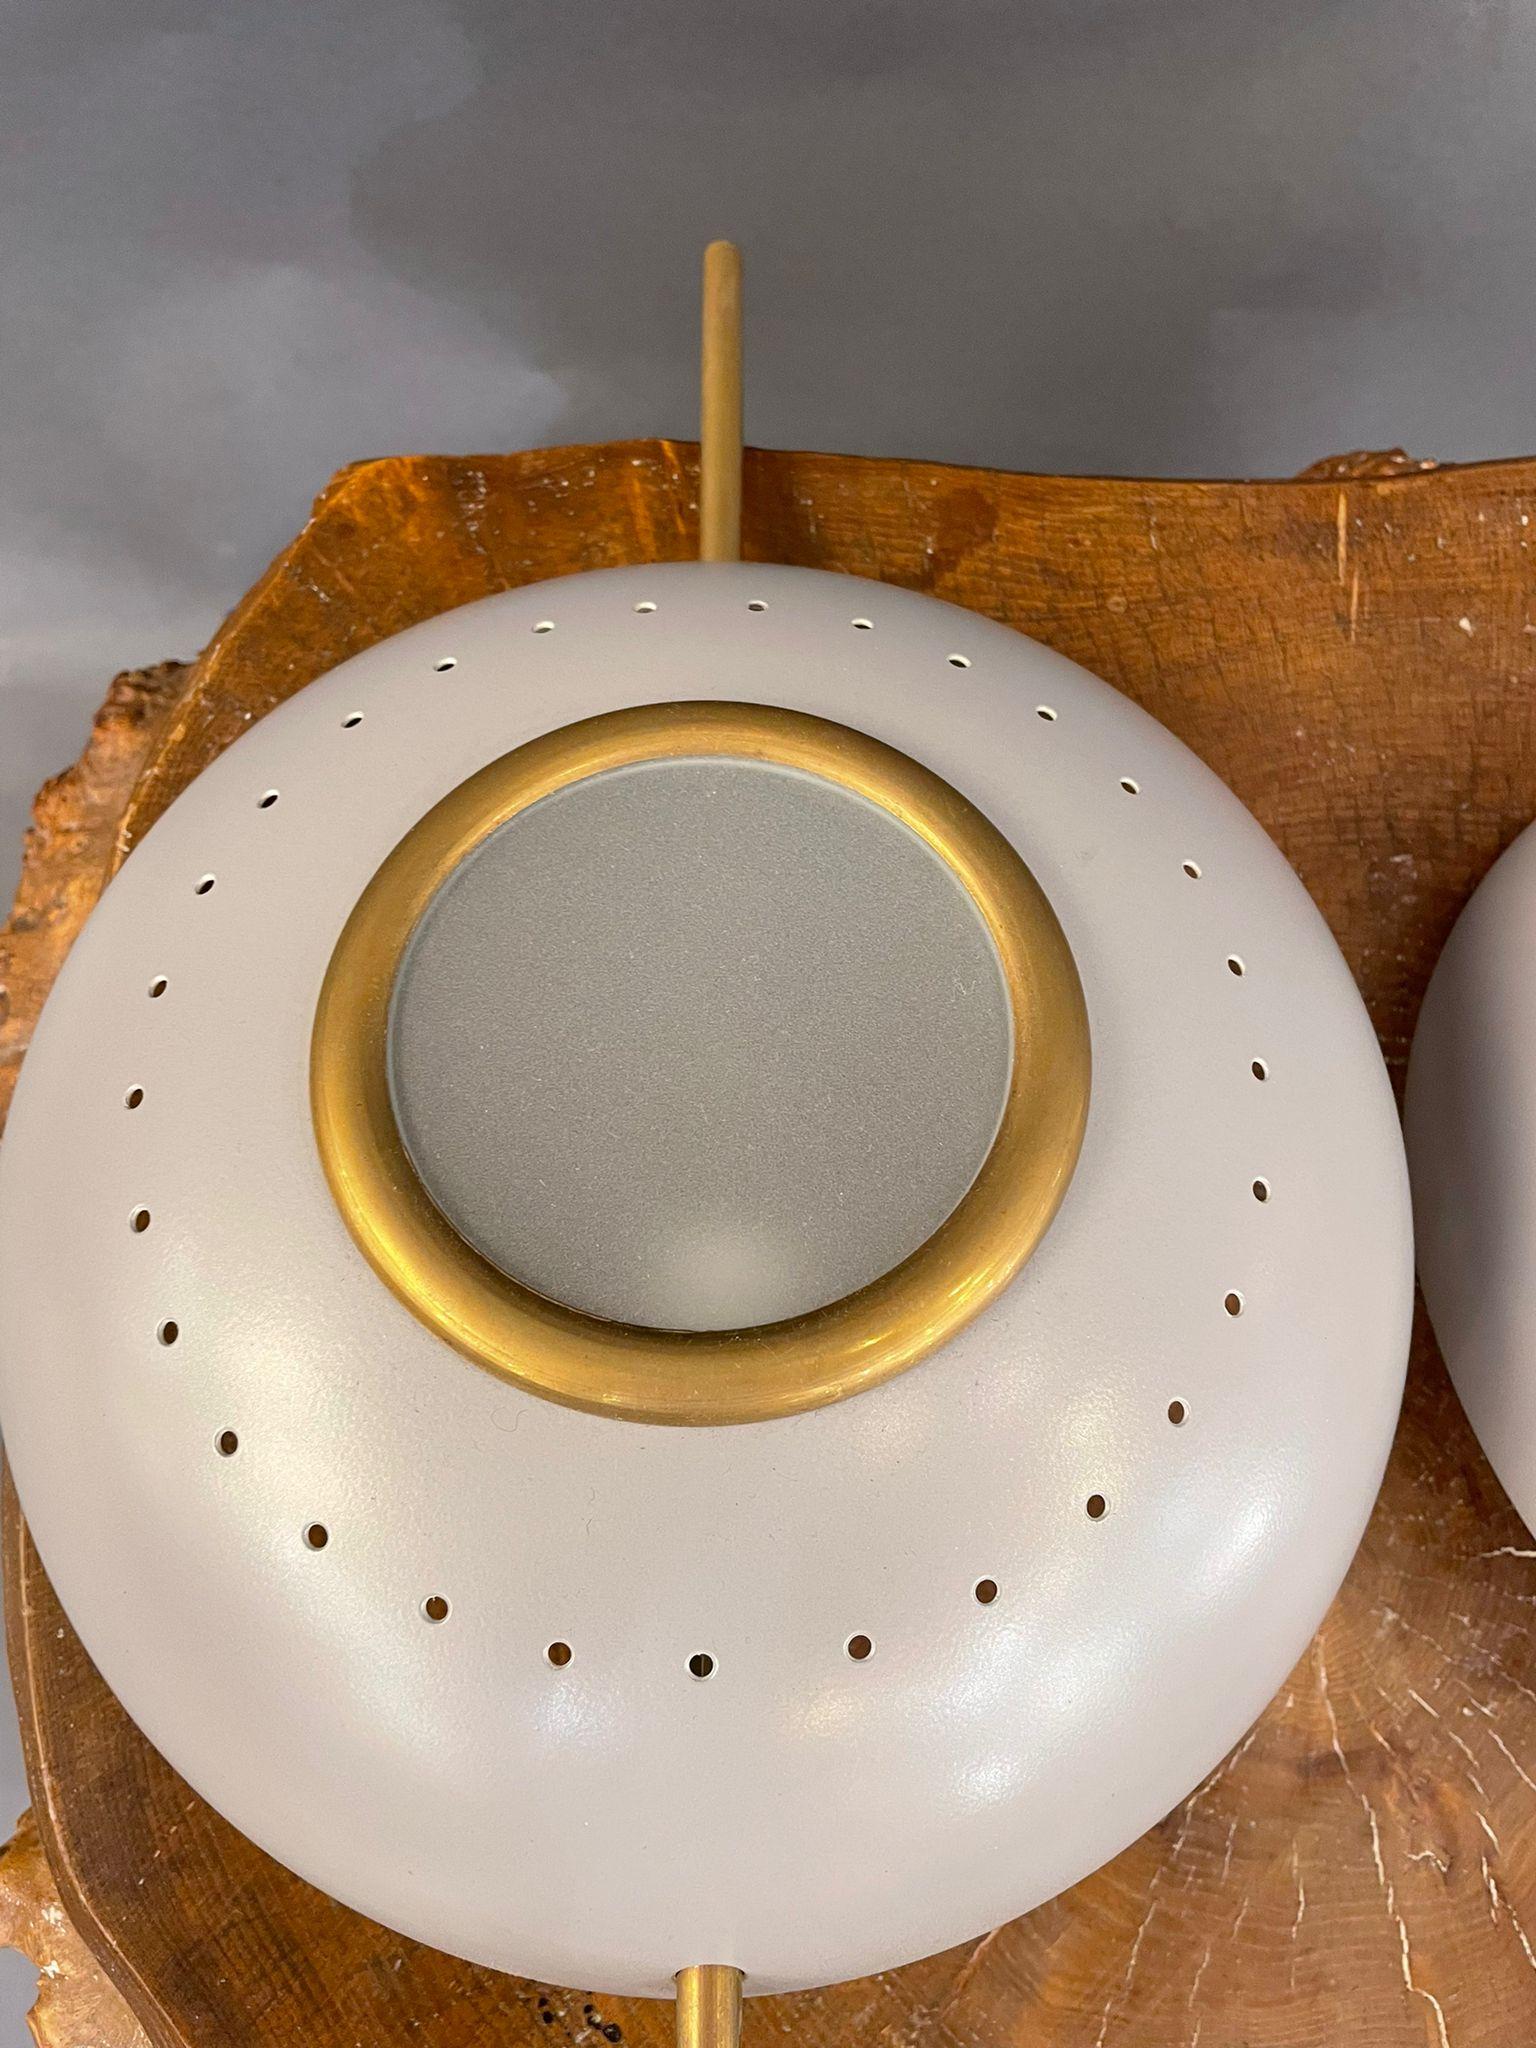 Late 20th Century Italian Modernist Wall Lights For Sale